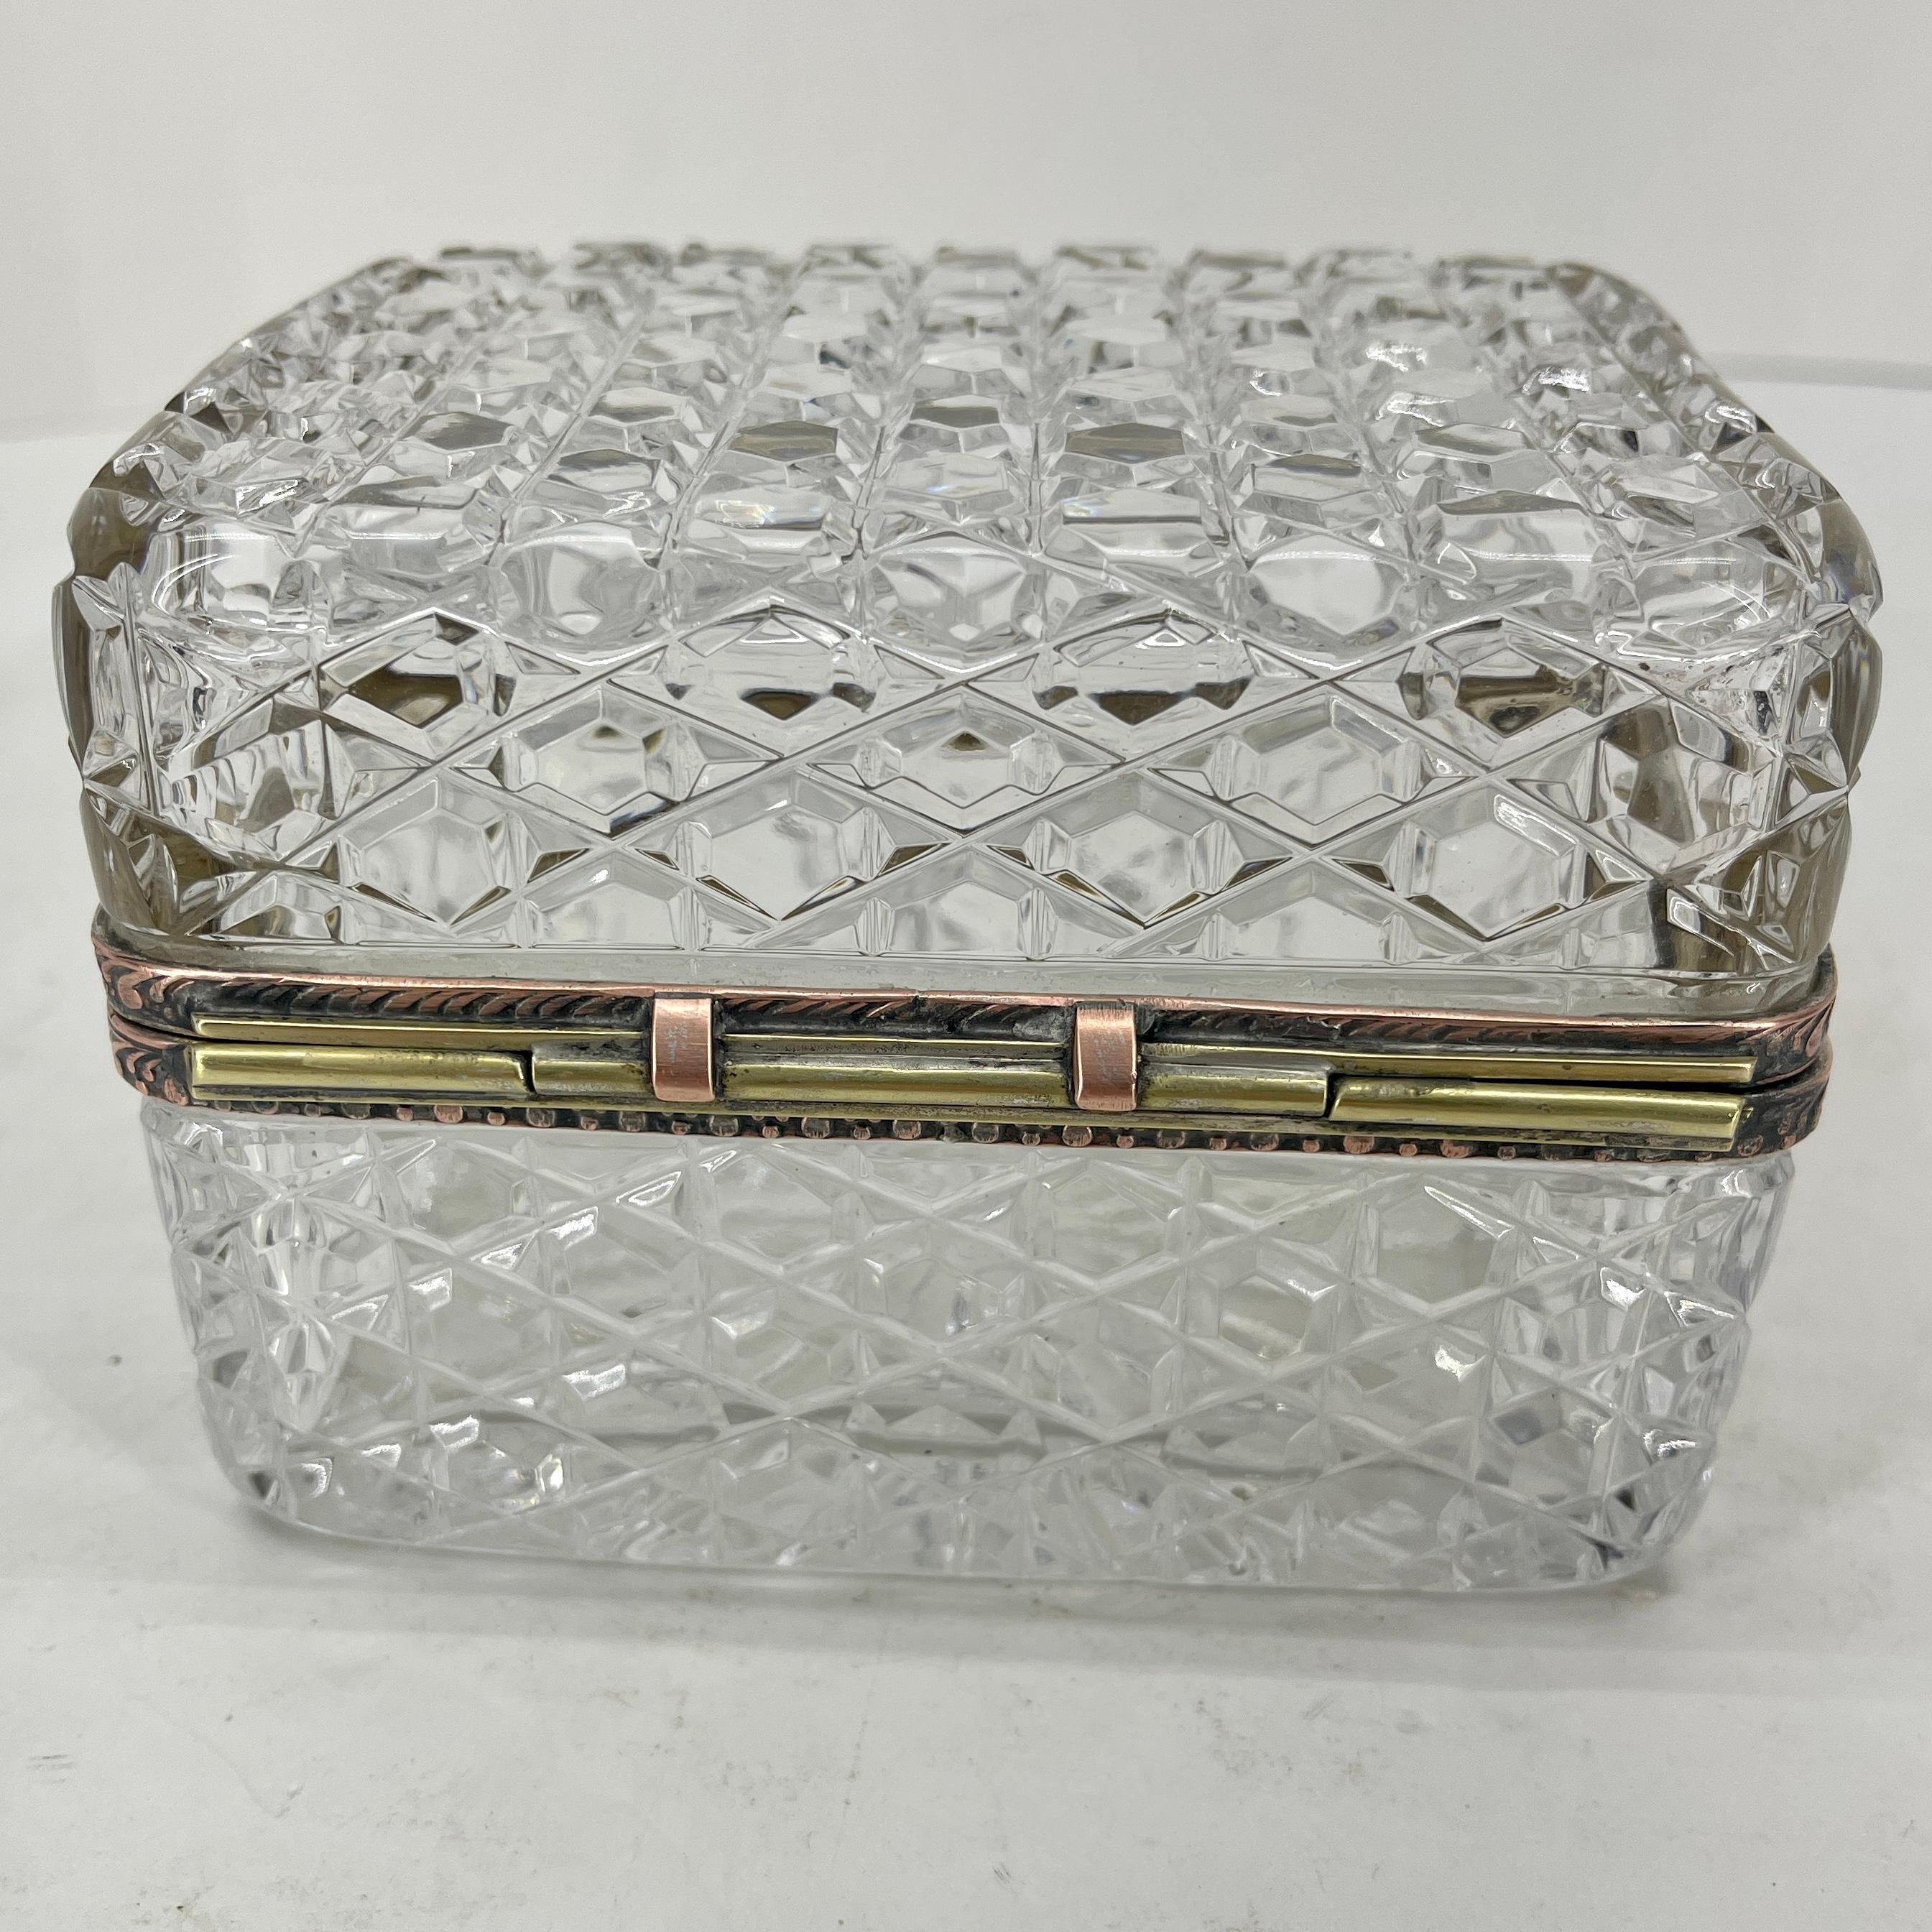 Hollywood Regency French Baccarat Style Cut Crystal Lidded Box with Brass Hardware For Sale